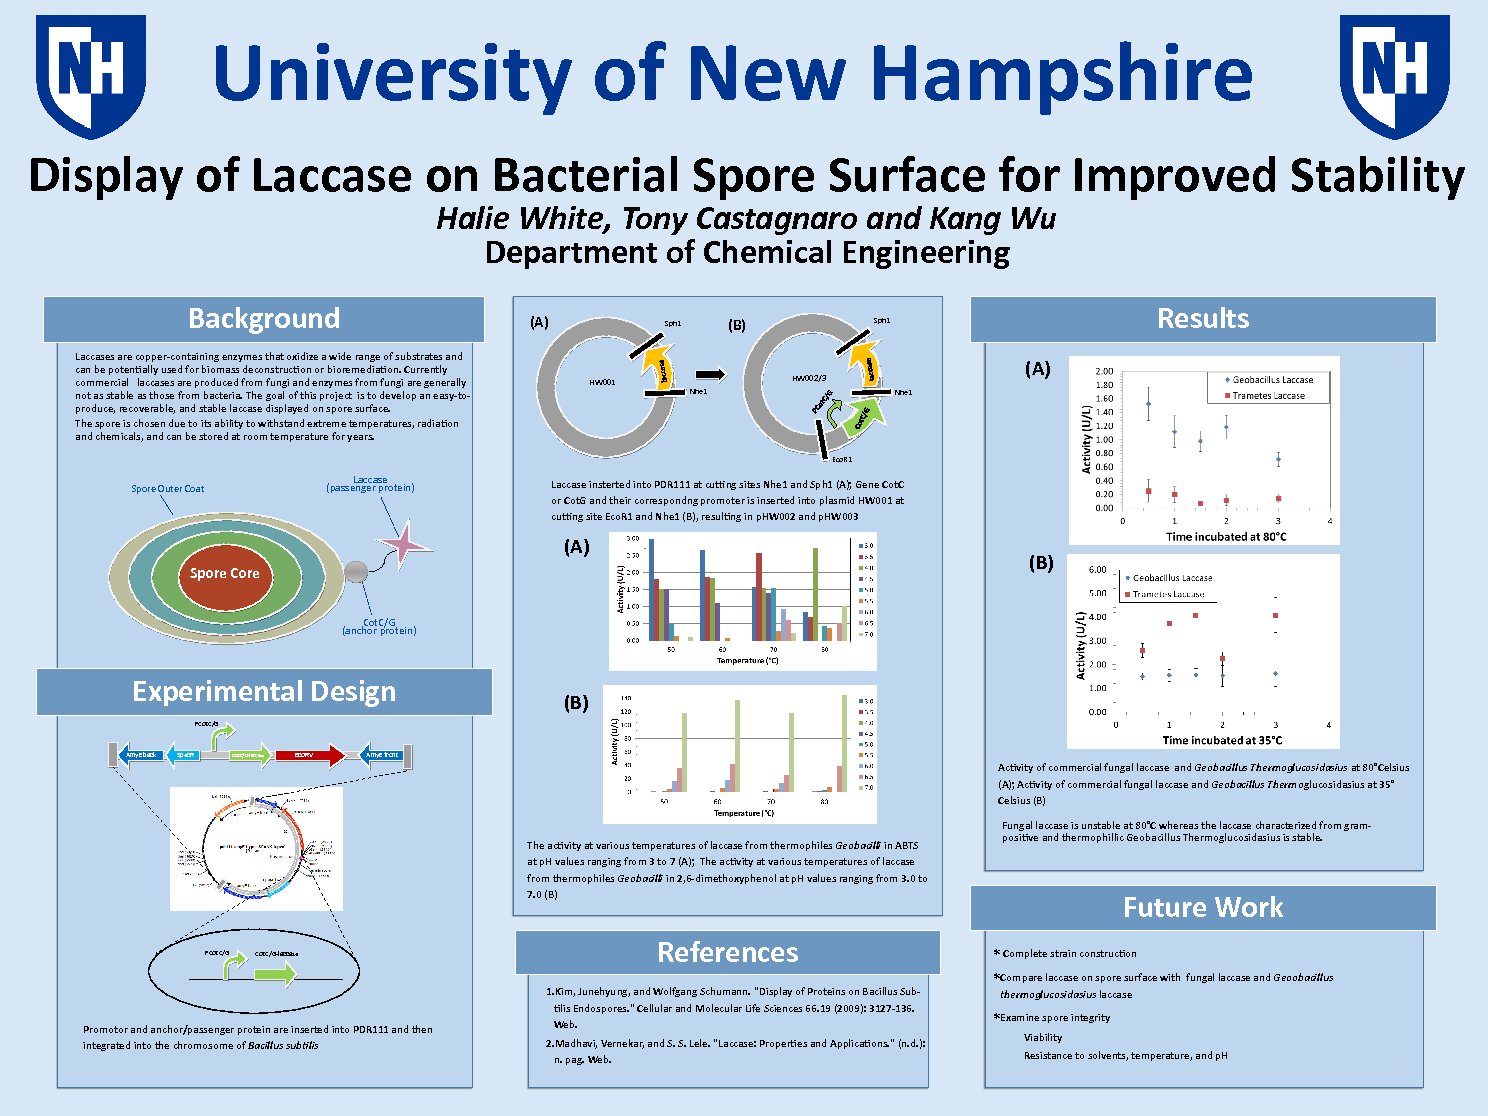 Display Of Laccase On Bacterial Spore Surface For Improved Stability by Hac39